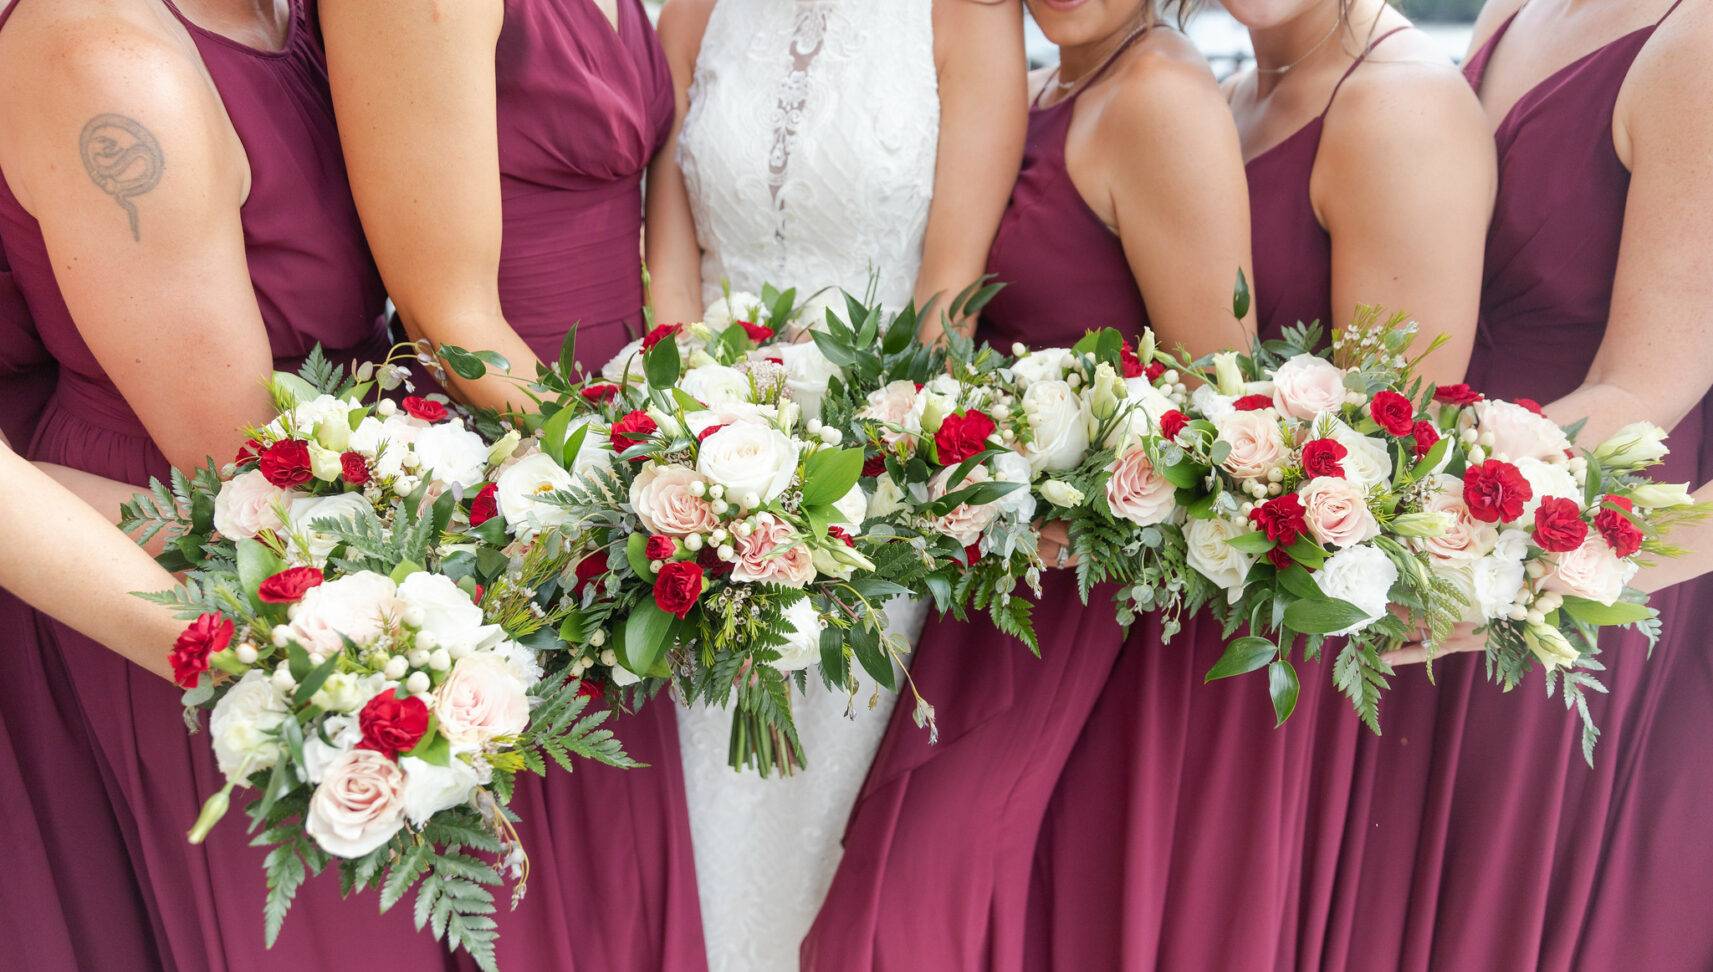 bridesmaids and bride holding bouquets